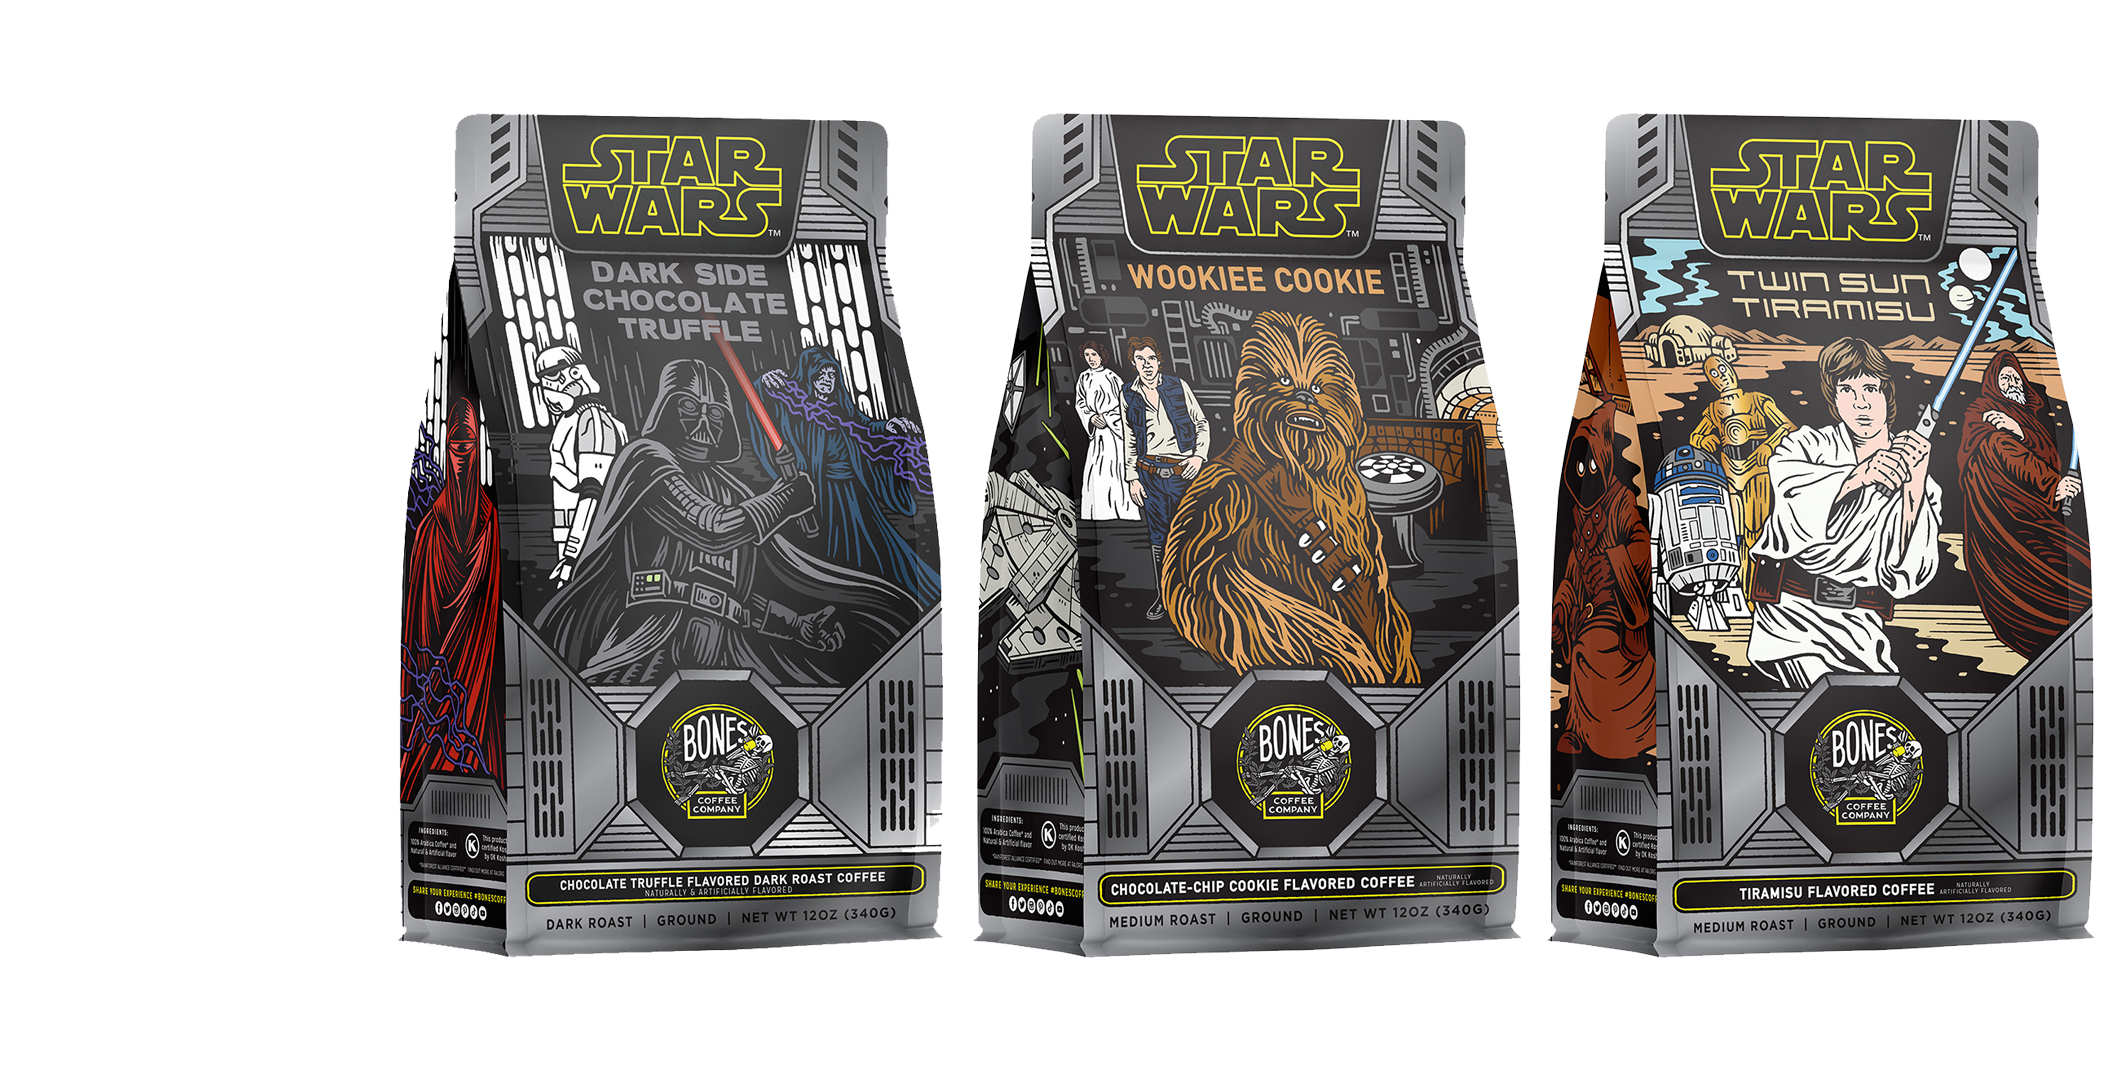 Three 12 ounce bags of flavored coffee inspired by Lucasfilm’s Star Wars. From left to right their names are Dark Side Chocolate Truffle, Wookiee Cookie, and Twin Sun Tiramisu. Their arts feature Darth Vader, Chewy, and Luke Skywalker respectively. On the left is a white plus sign.